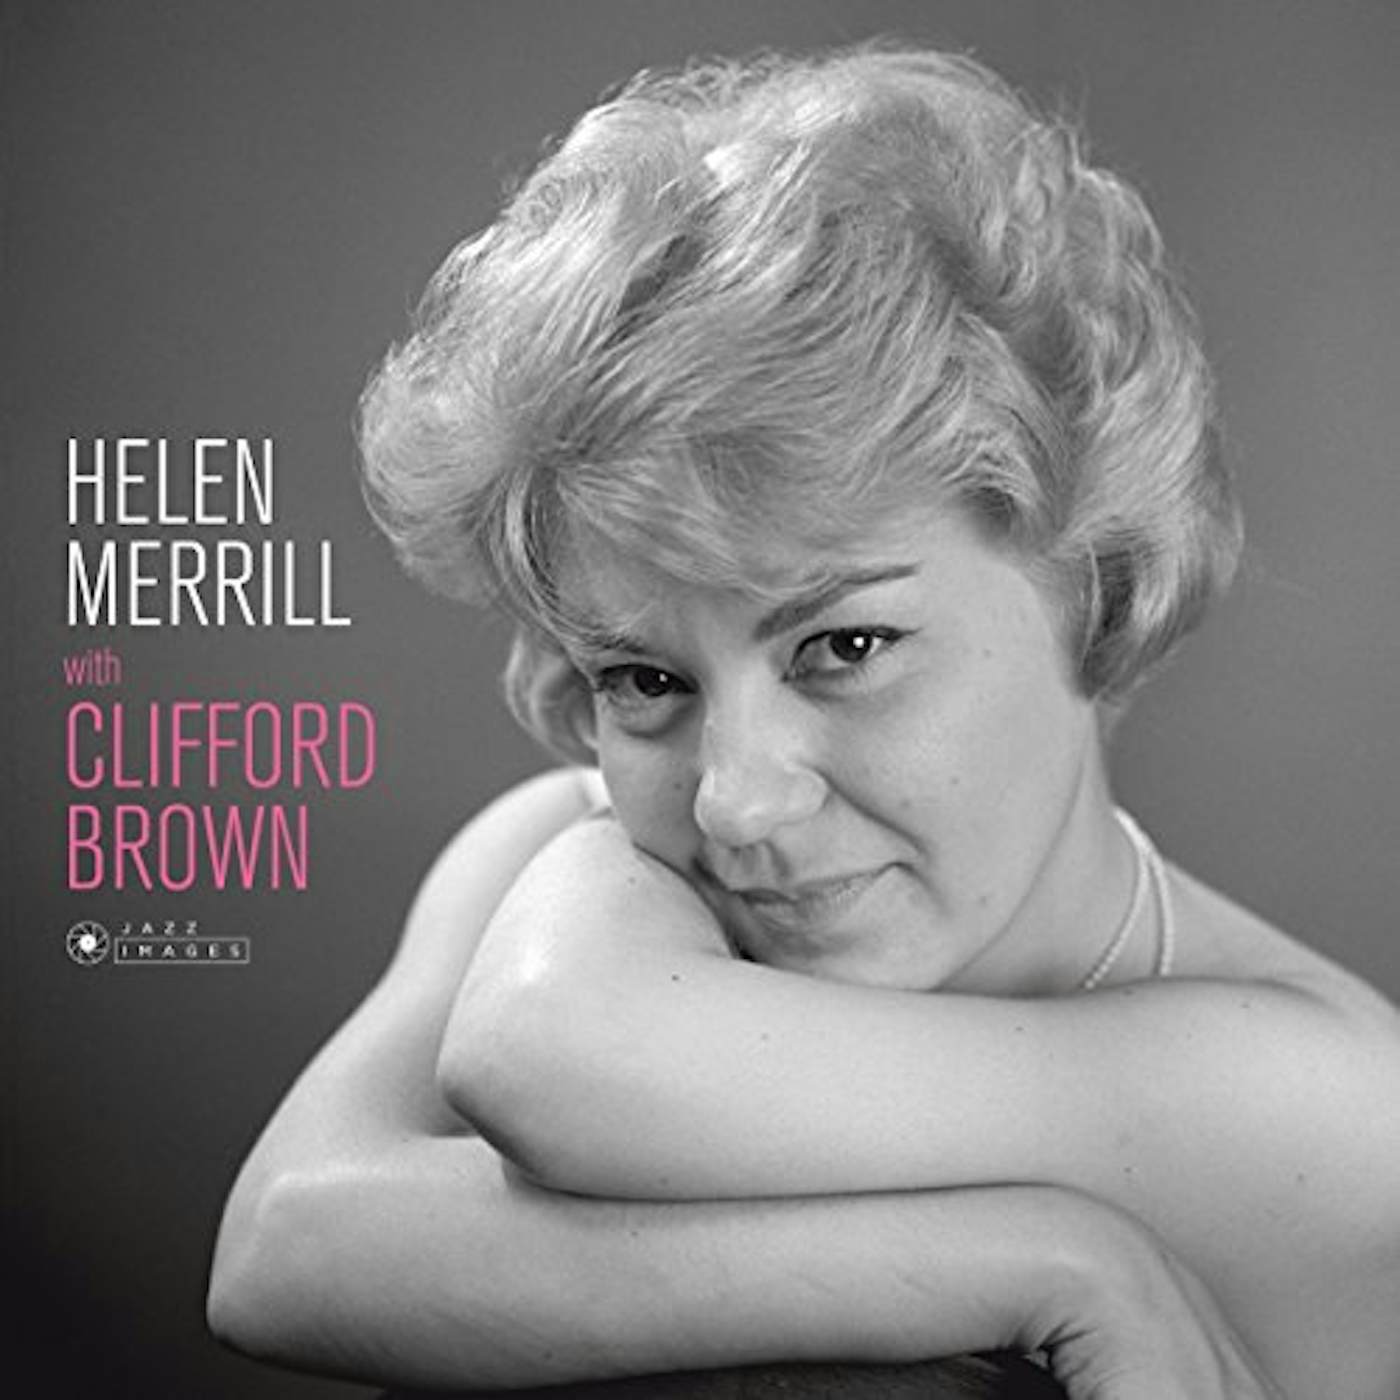 Helen Merrill WITH CLIFFORD BROWN (COVER PHOTO JEAN-PIERRE) Vinyl Record